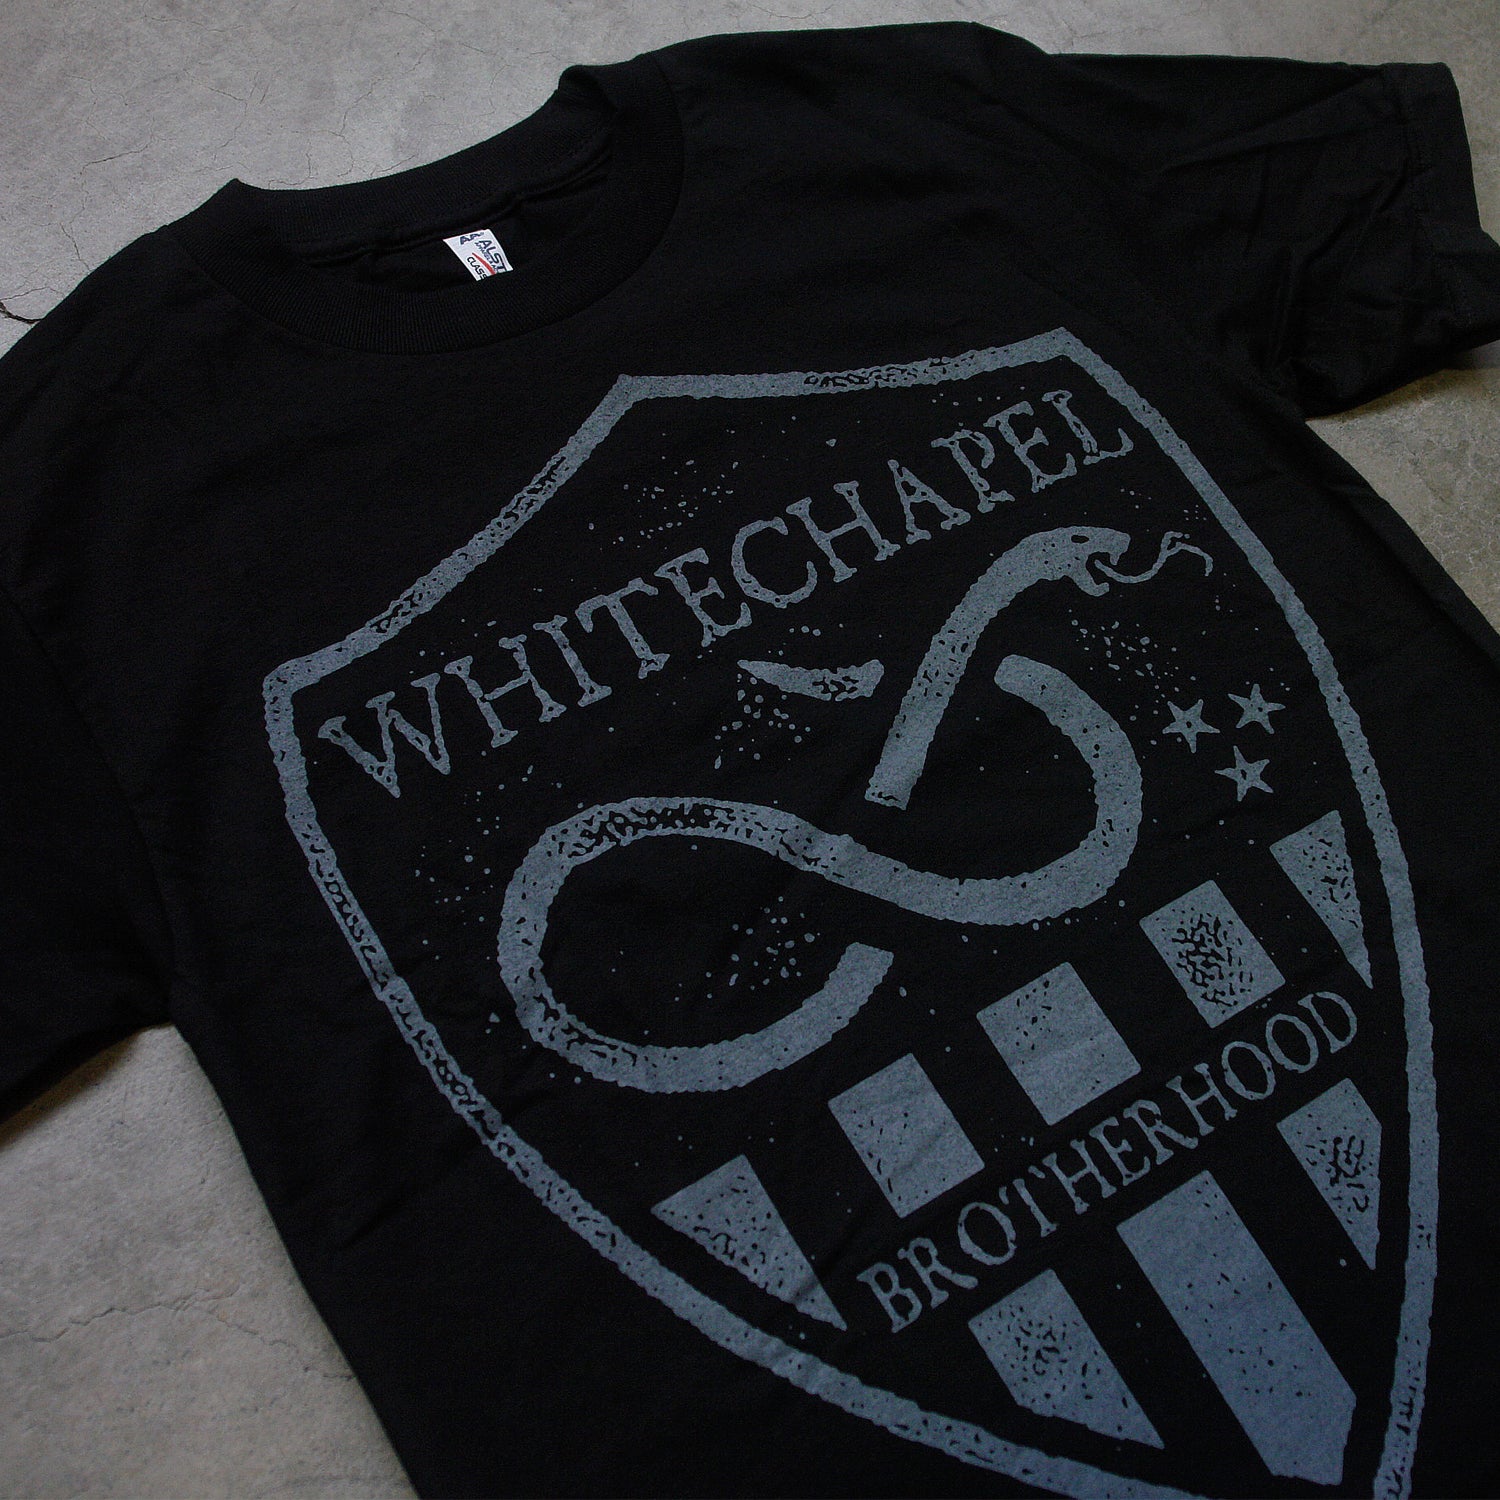 close up Image of a black tshirt against a grey concrete background. There is a graphic of a grey badge on the shirt, inside this badge in grey text reads "whitechapel". Below this is a graphic of a snake with its tongue out. There are three small stars next to the snake. Below this are grey stripes, and in between the stripes in the middle reads "brotherhood".